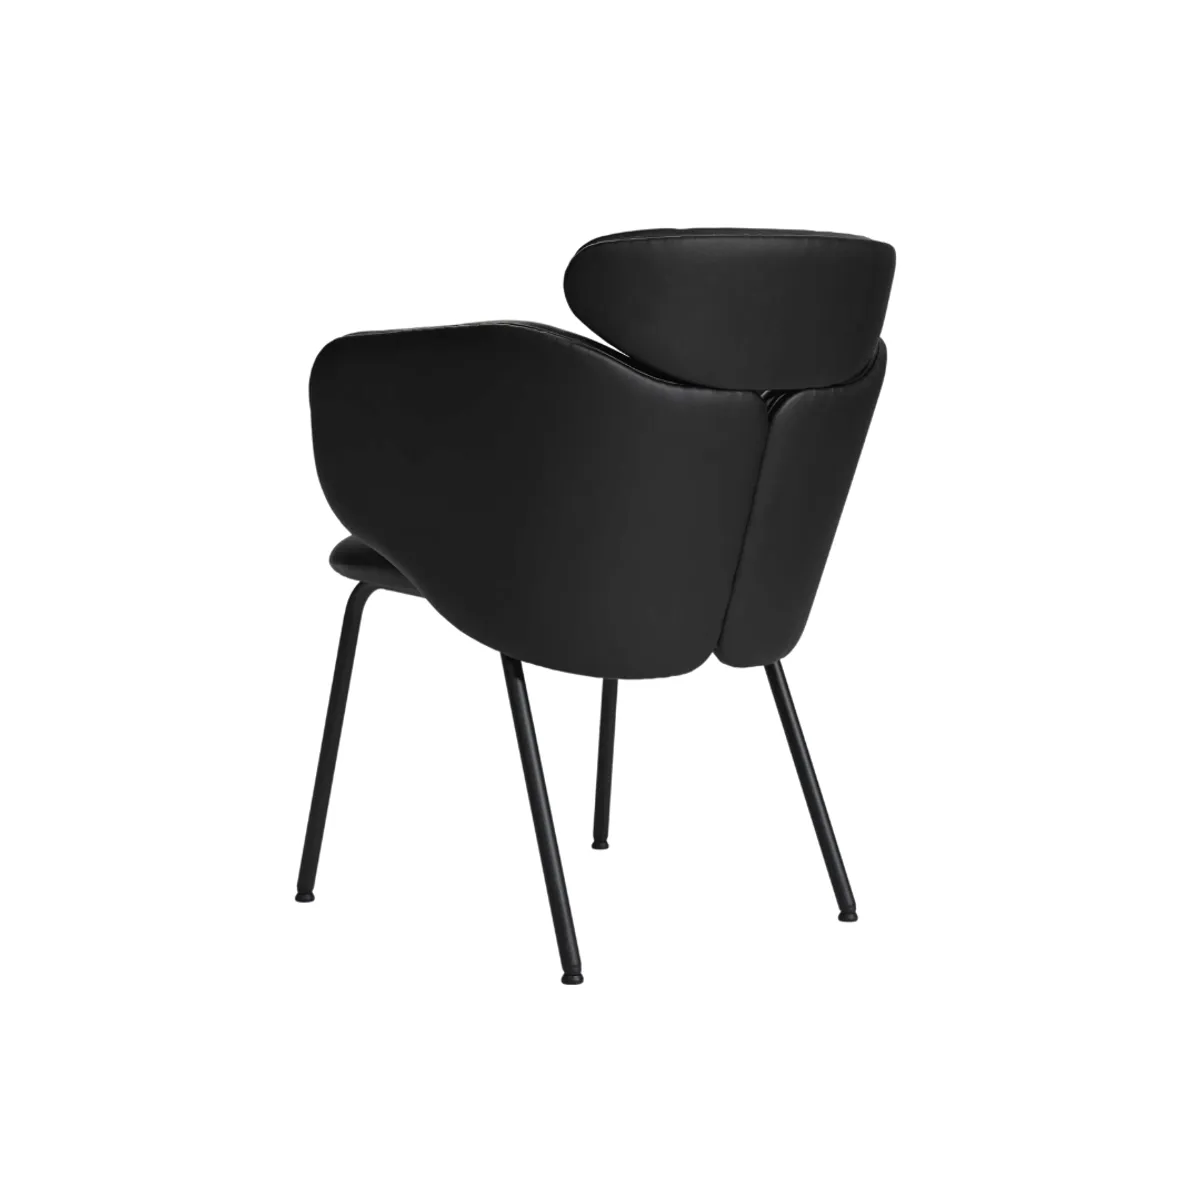 Russo armchair 5+